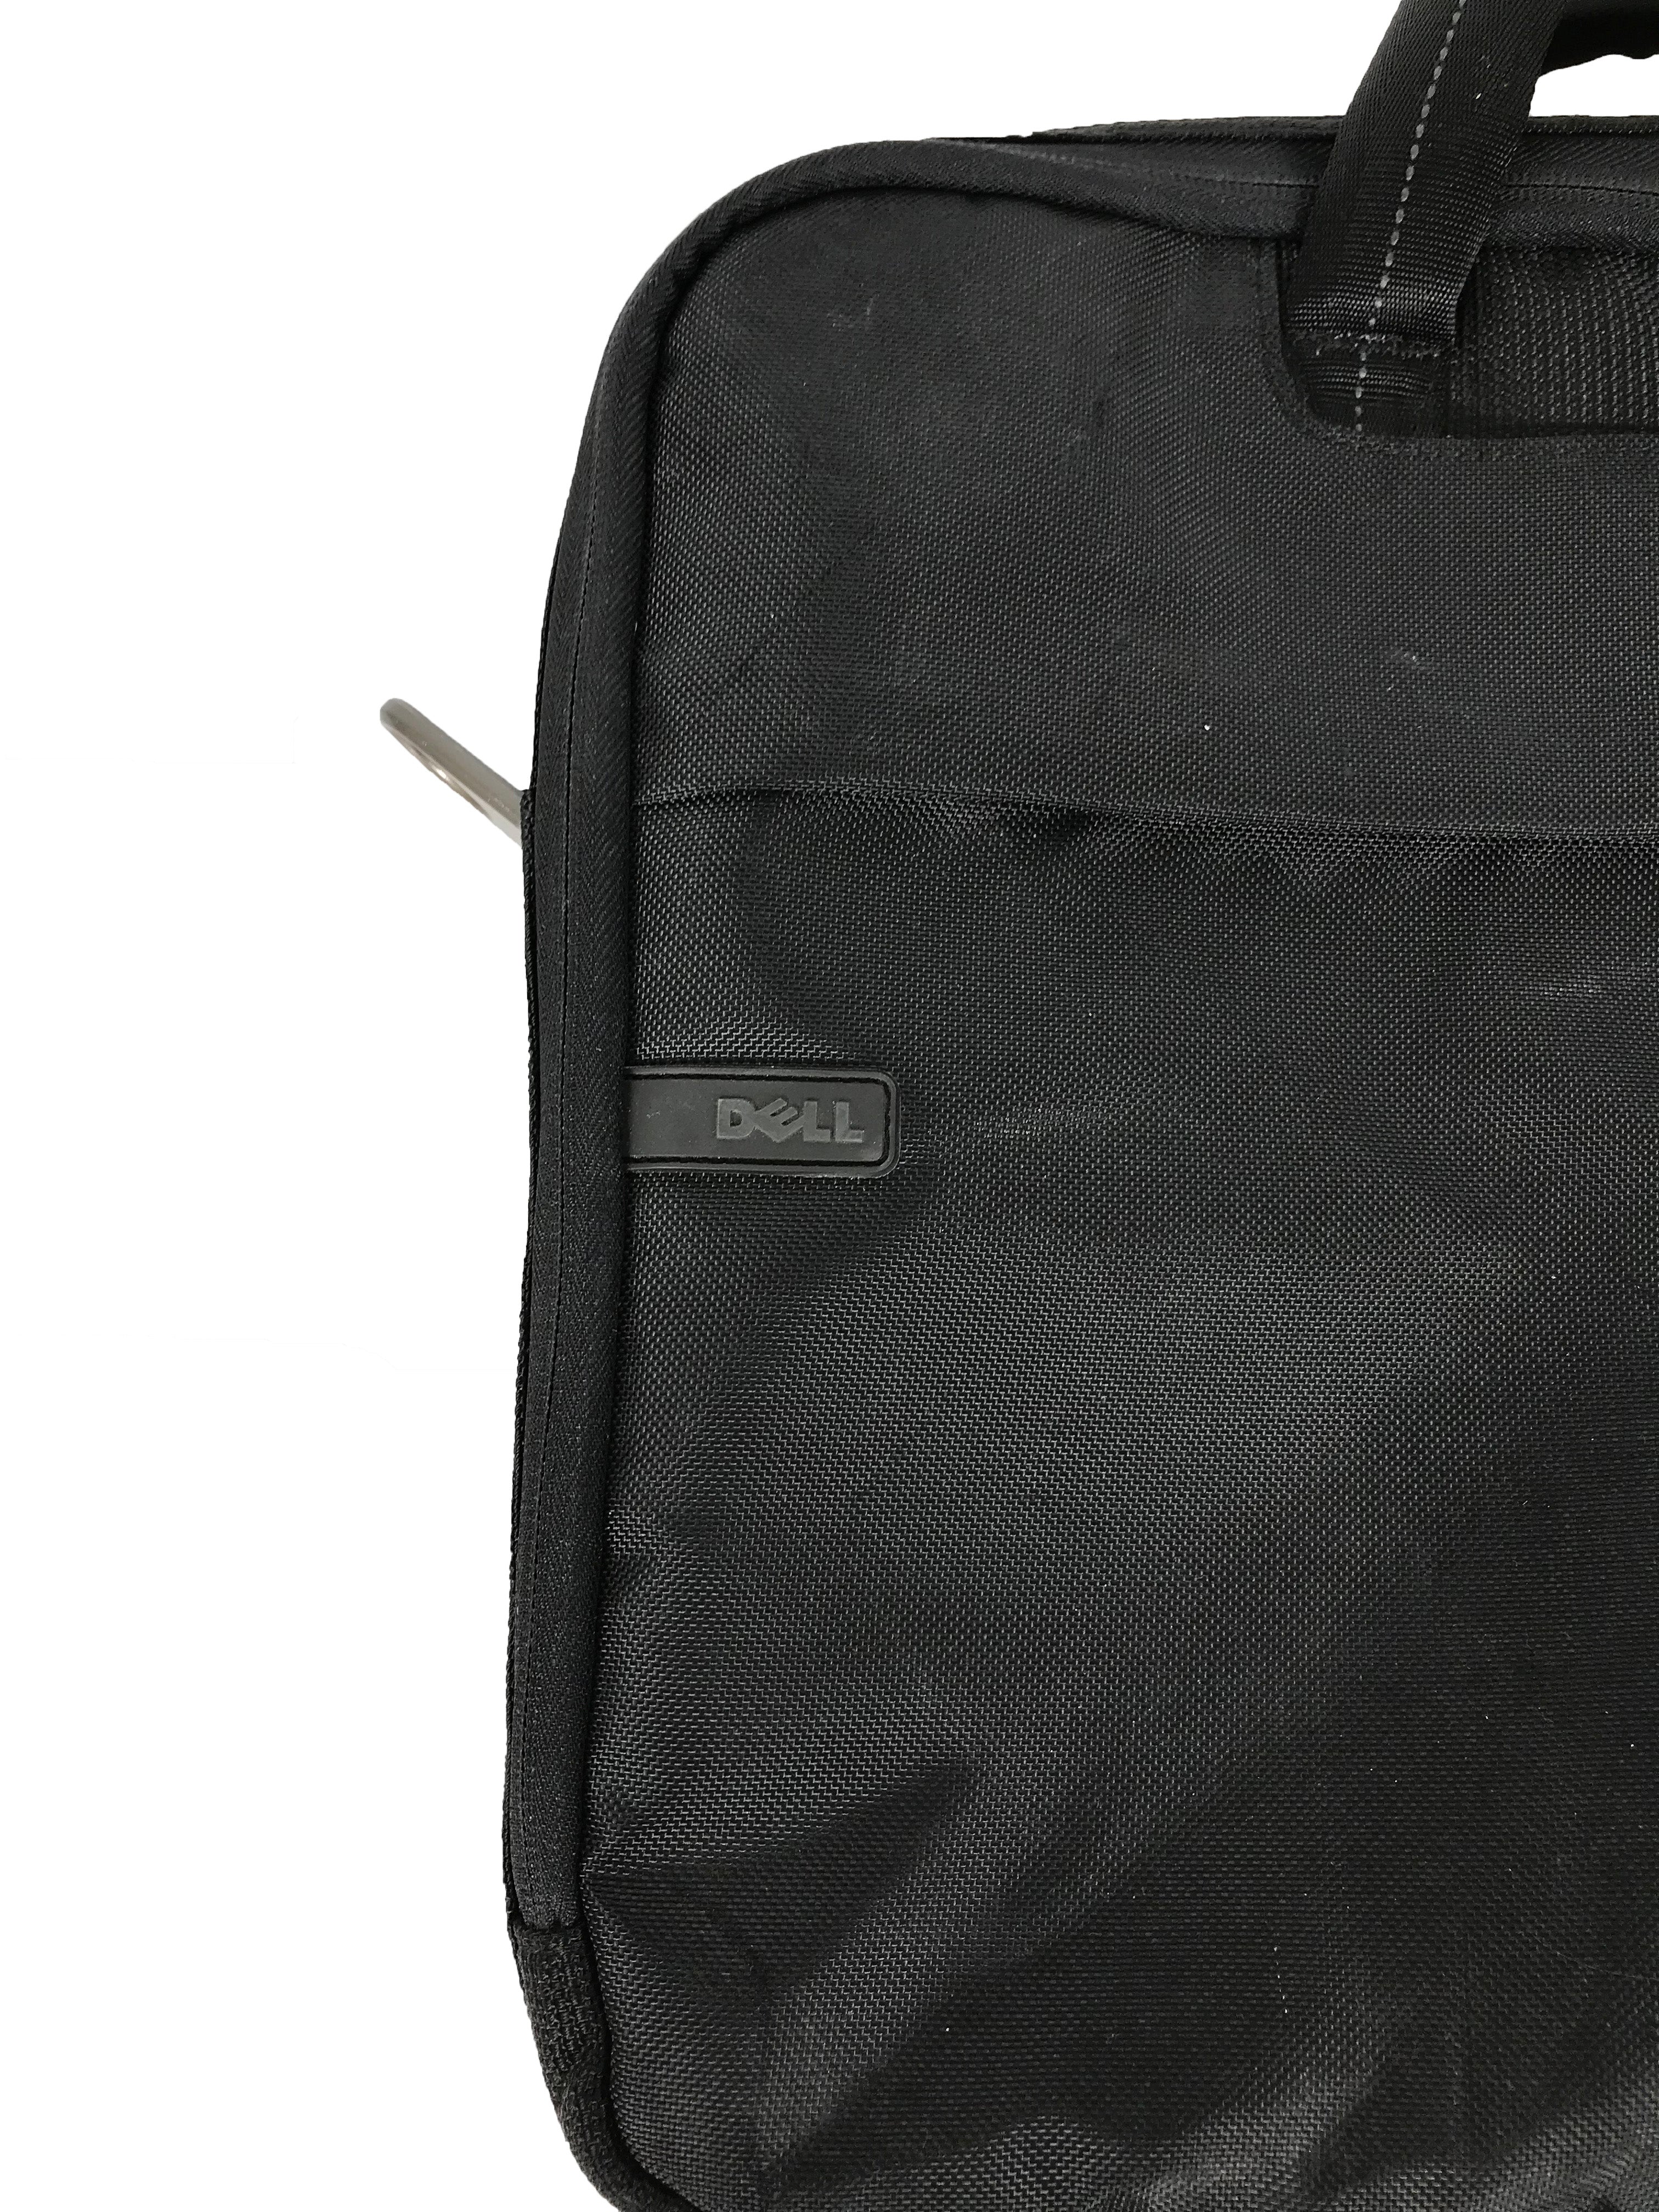 Dell Computers Laptop Backpack | Backpacks Dell Notebook | Dell Laptop Backpack  Bag - Laptop Bags & Cases - Aliexpress